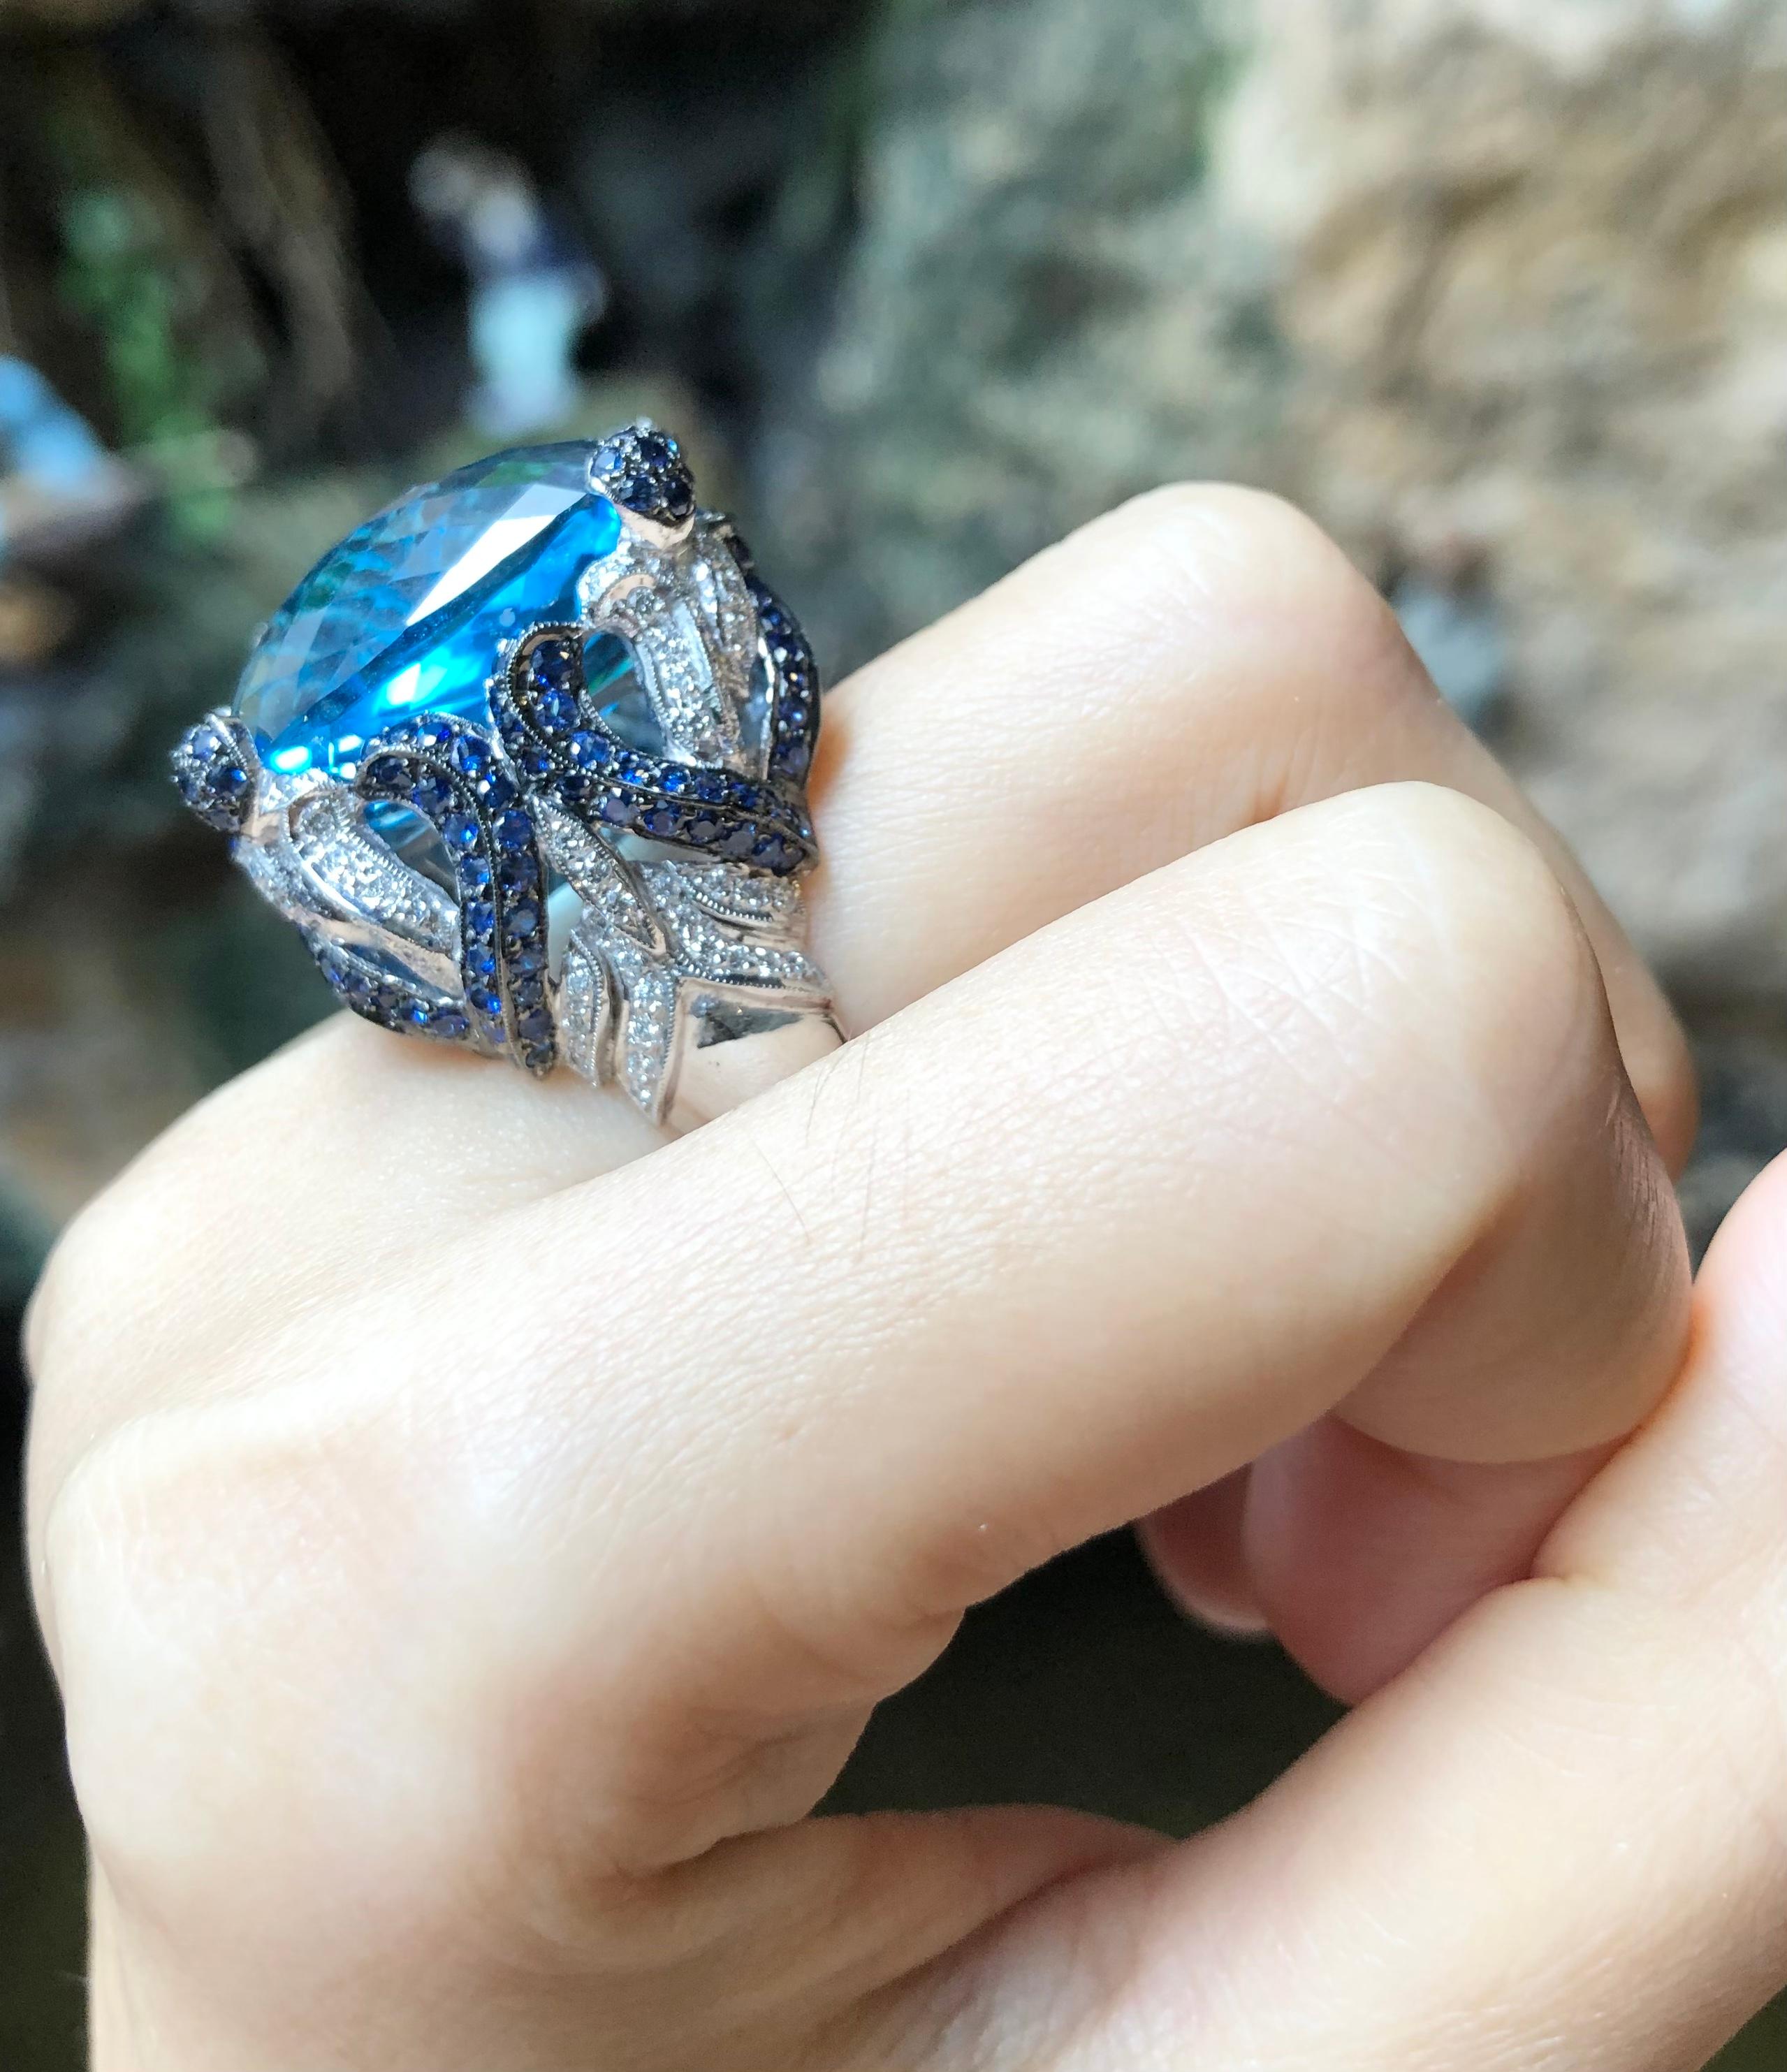 Blue Topaz 35.35 carats with Blue Sapphire 2.80 carats and Diamond 0.75 carat Ring set in 18 Karat White Gold Settings

Width: 2.0 cm 
Length: 2.3 cm
Ring Size: 54
Total Weight: 25.56 grams

